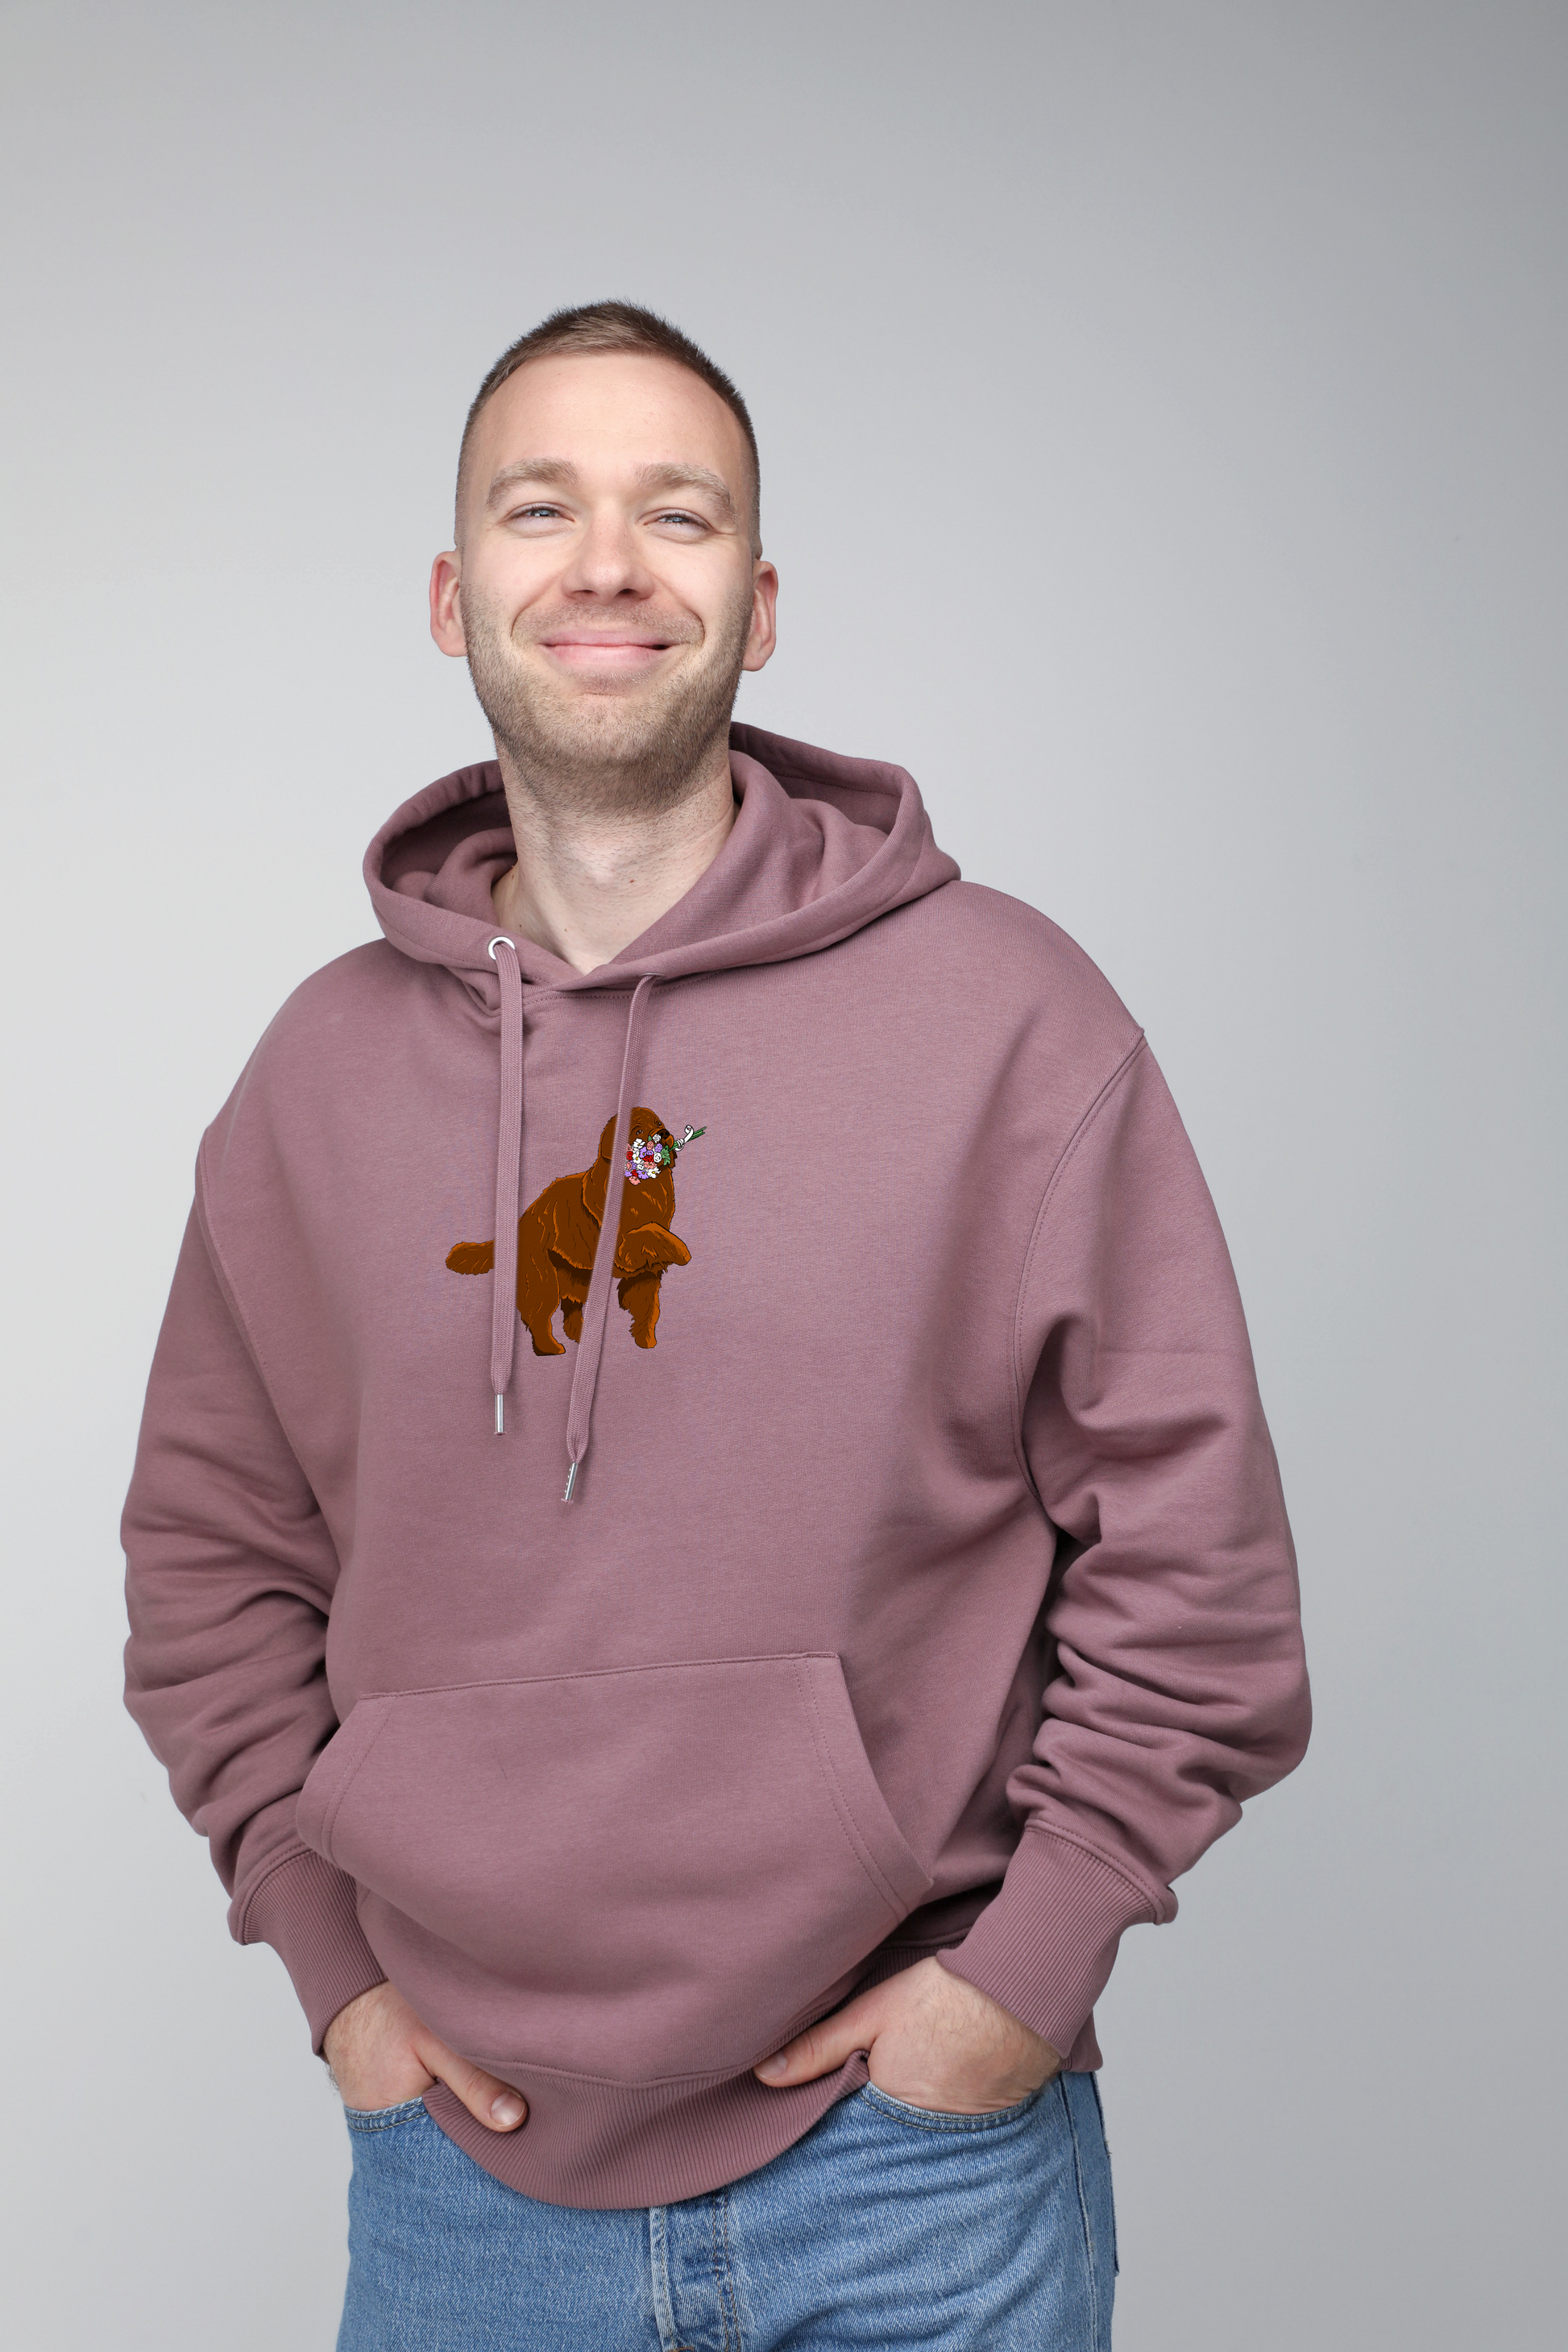 Giant dog with flowers | Hoodie with dog. Oversize fit | Unisex by My Wild Other